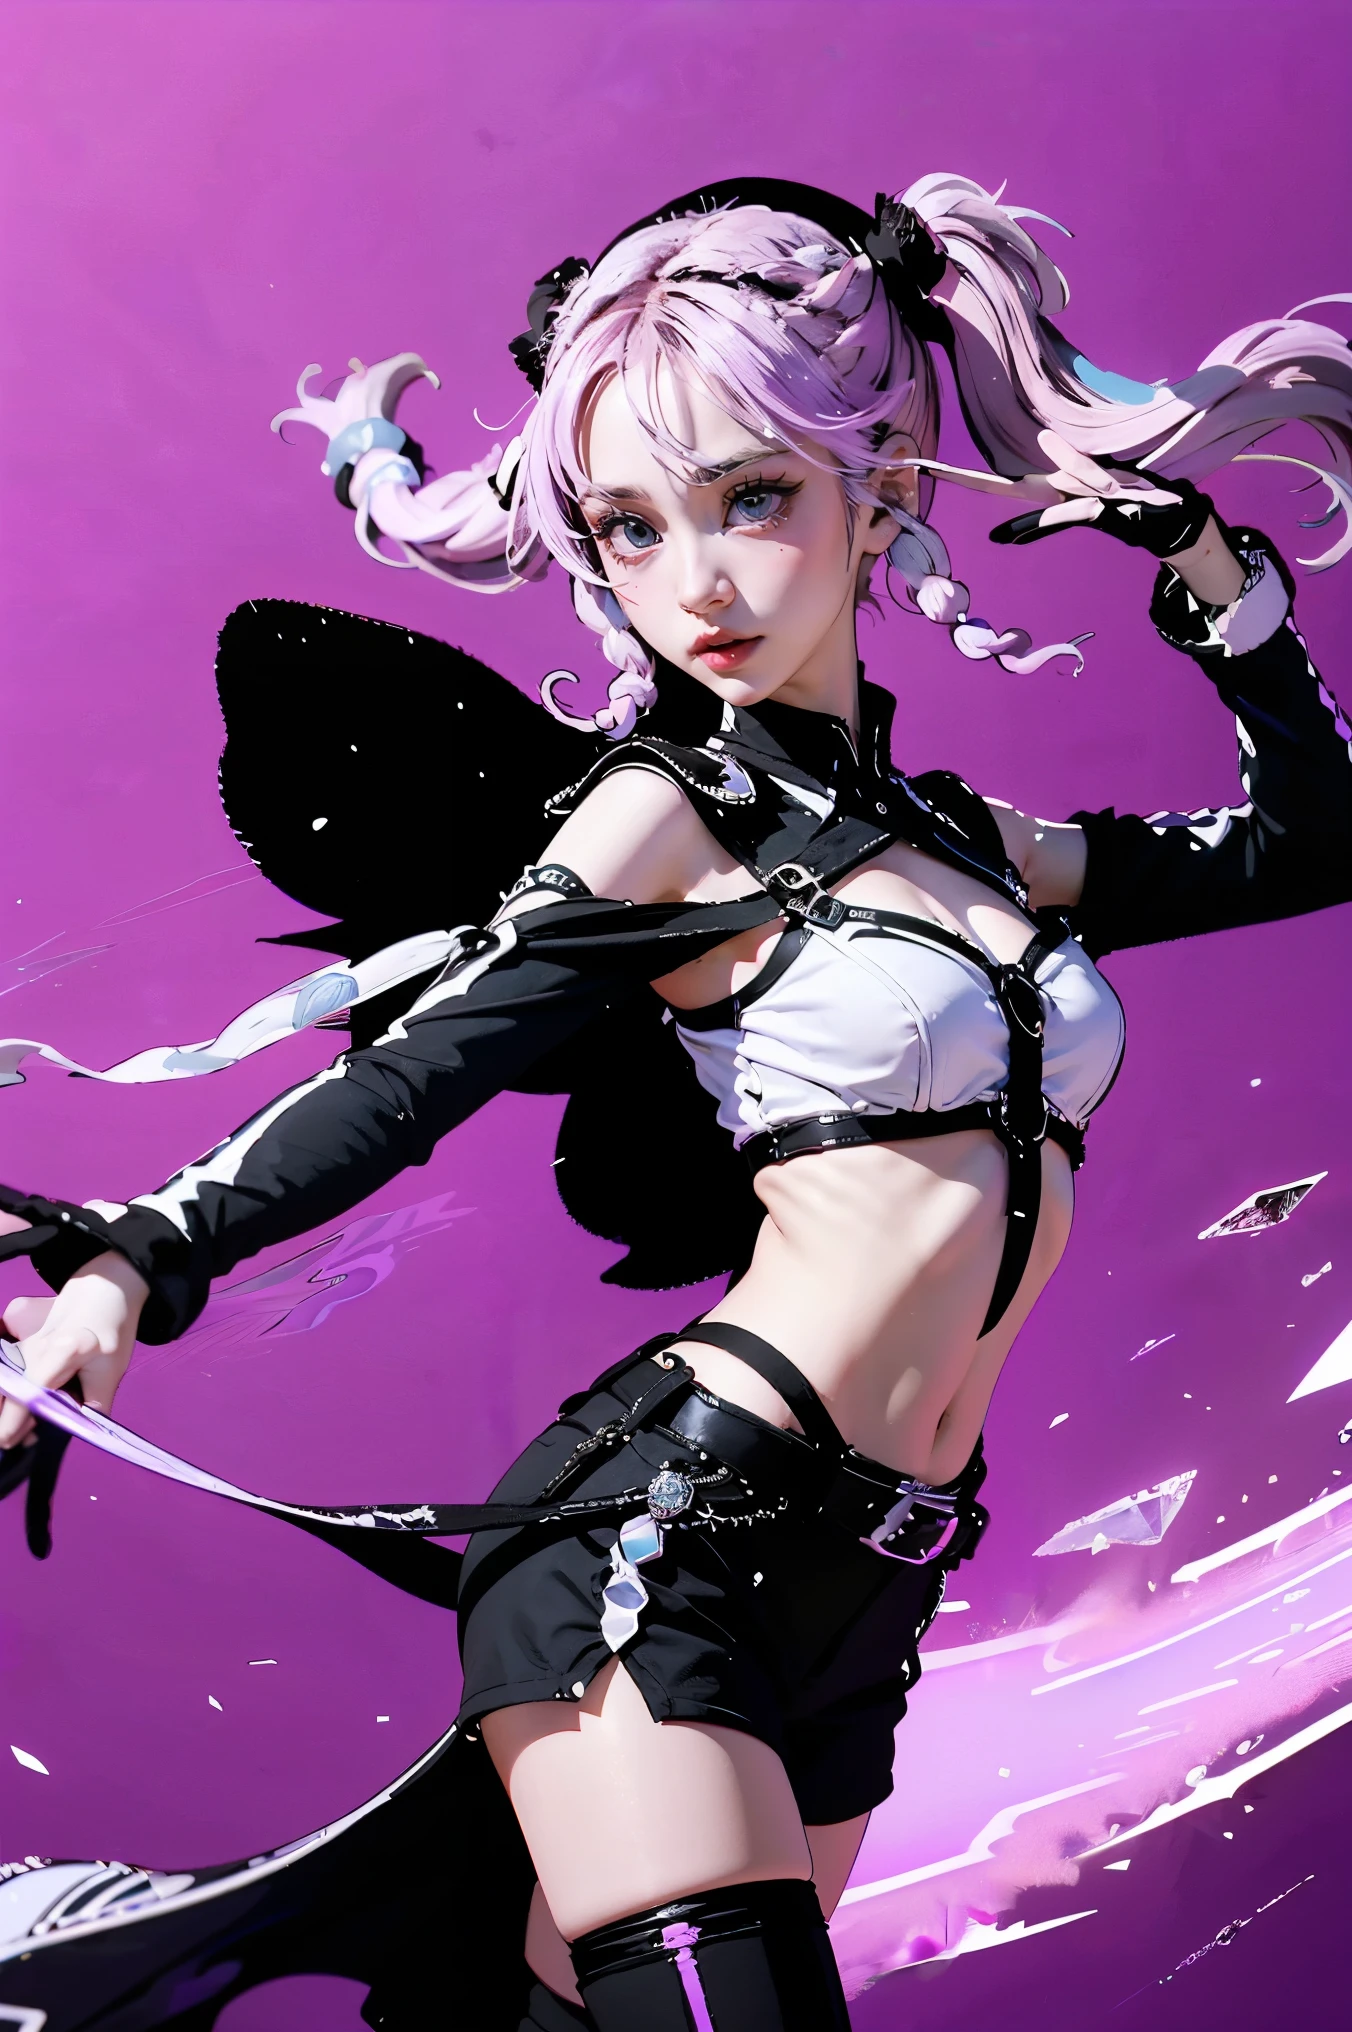 Best Quality, Ultra High Resolution, Cute, (KPOP Idol), (Long Twintail), (Light Purple Hair:1), ((Big Eyes)), Looking at you,
BREAK ((upper body:1.3)), Front View,A character with long, flowing silver hair and a slender build, wearing a black and white outfit that includes thigh-high boots and gloves. The character is in a dynamic pose surrounded by ethereal purple crystals and energy,
The character is in a dynamic pose surrounded by ethereal purple crystals and energy,A character with long, flowing purple hair, wearing a metallic top and black shorts with thigh-high boots. The outfit includes straps and belts, giving it a futuristic or fantasy style. The character is in a dynamic pose with radiant light or energy surrounding them, set against a minimalistic abstract background,